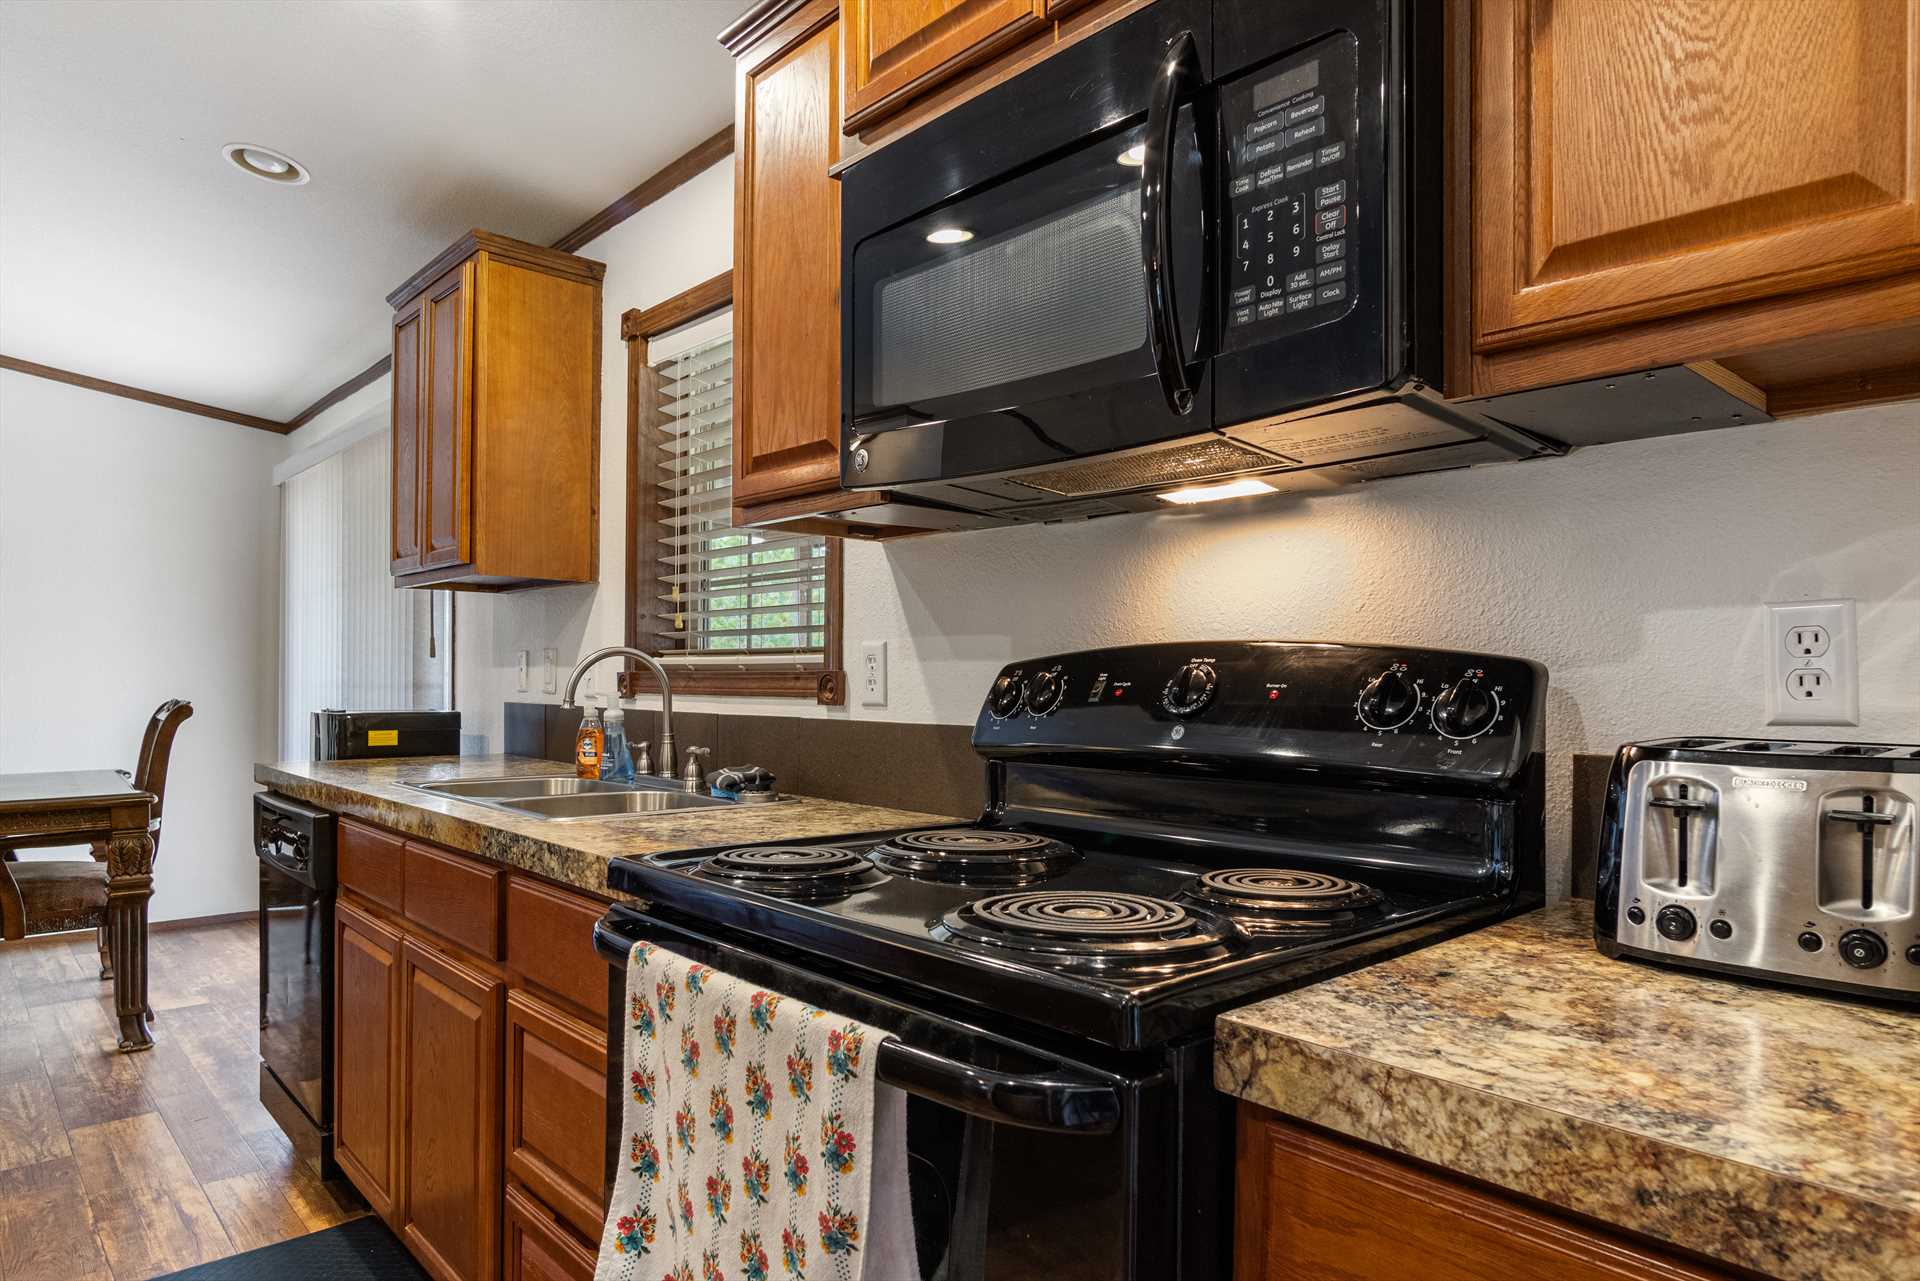                                                 Your country kitchen is generously equipped with plenty of appliances, including a dishwasher!